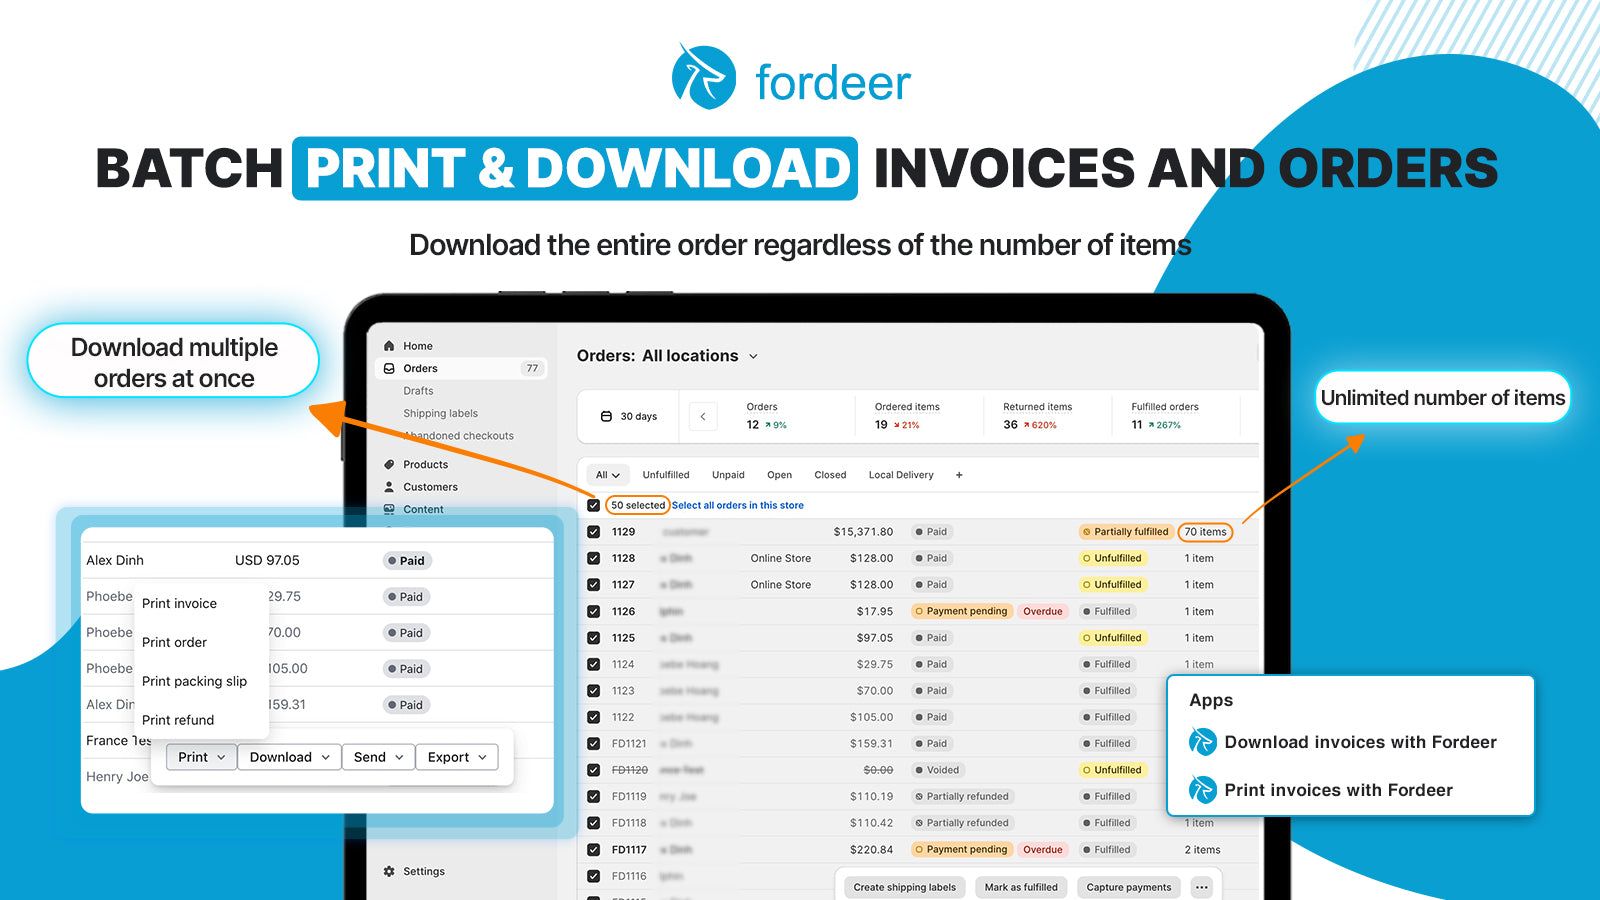 Batch print & download invoices and orders